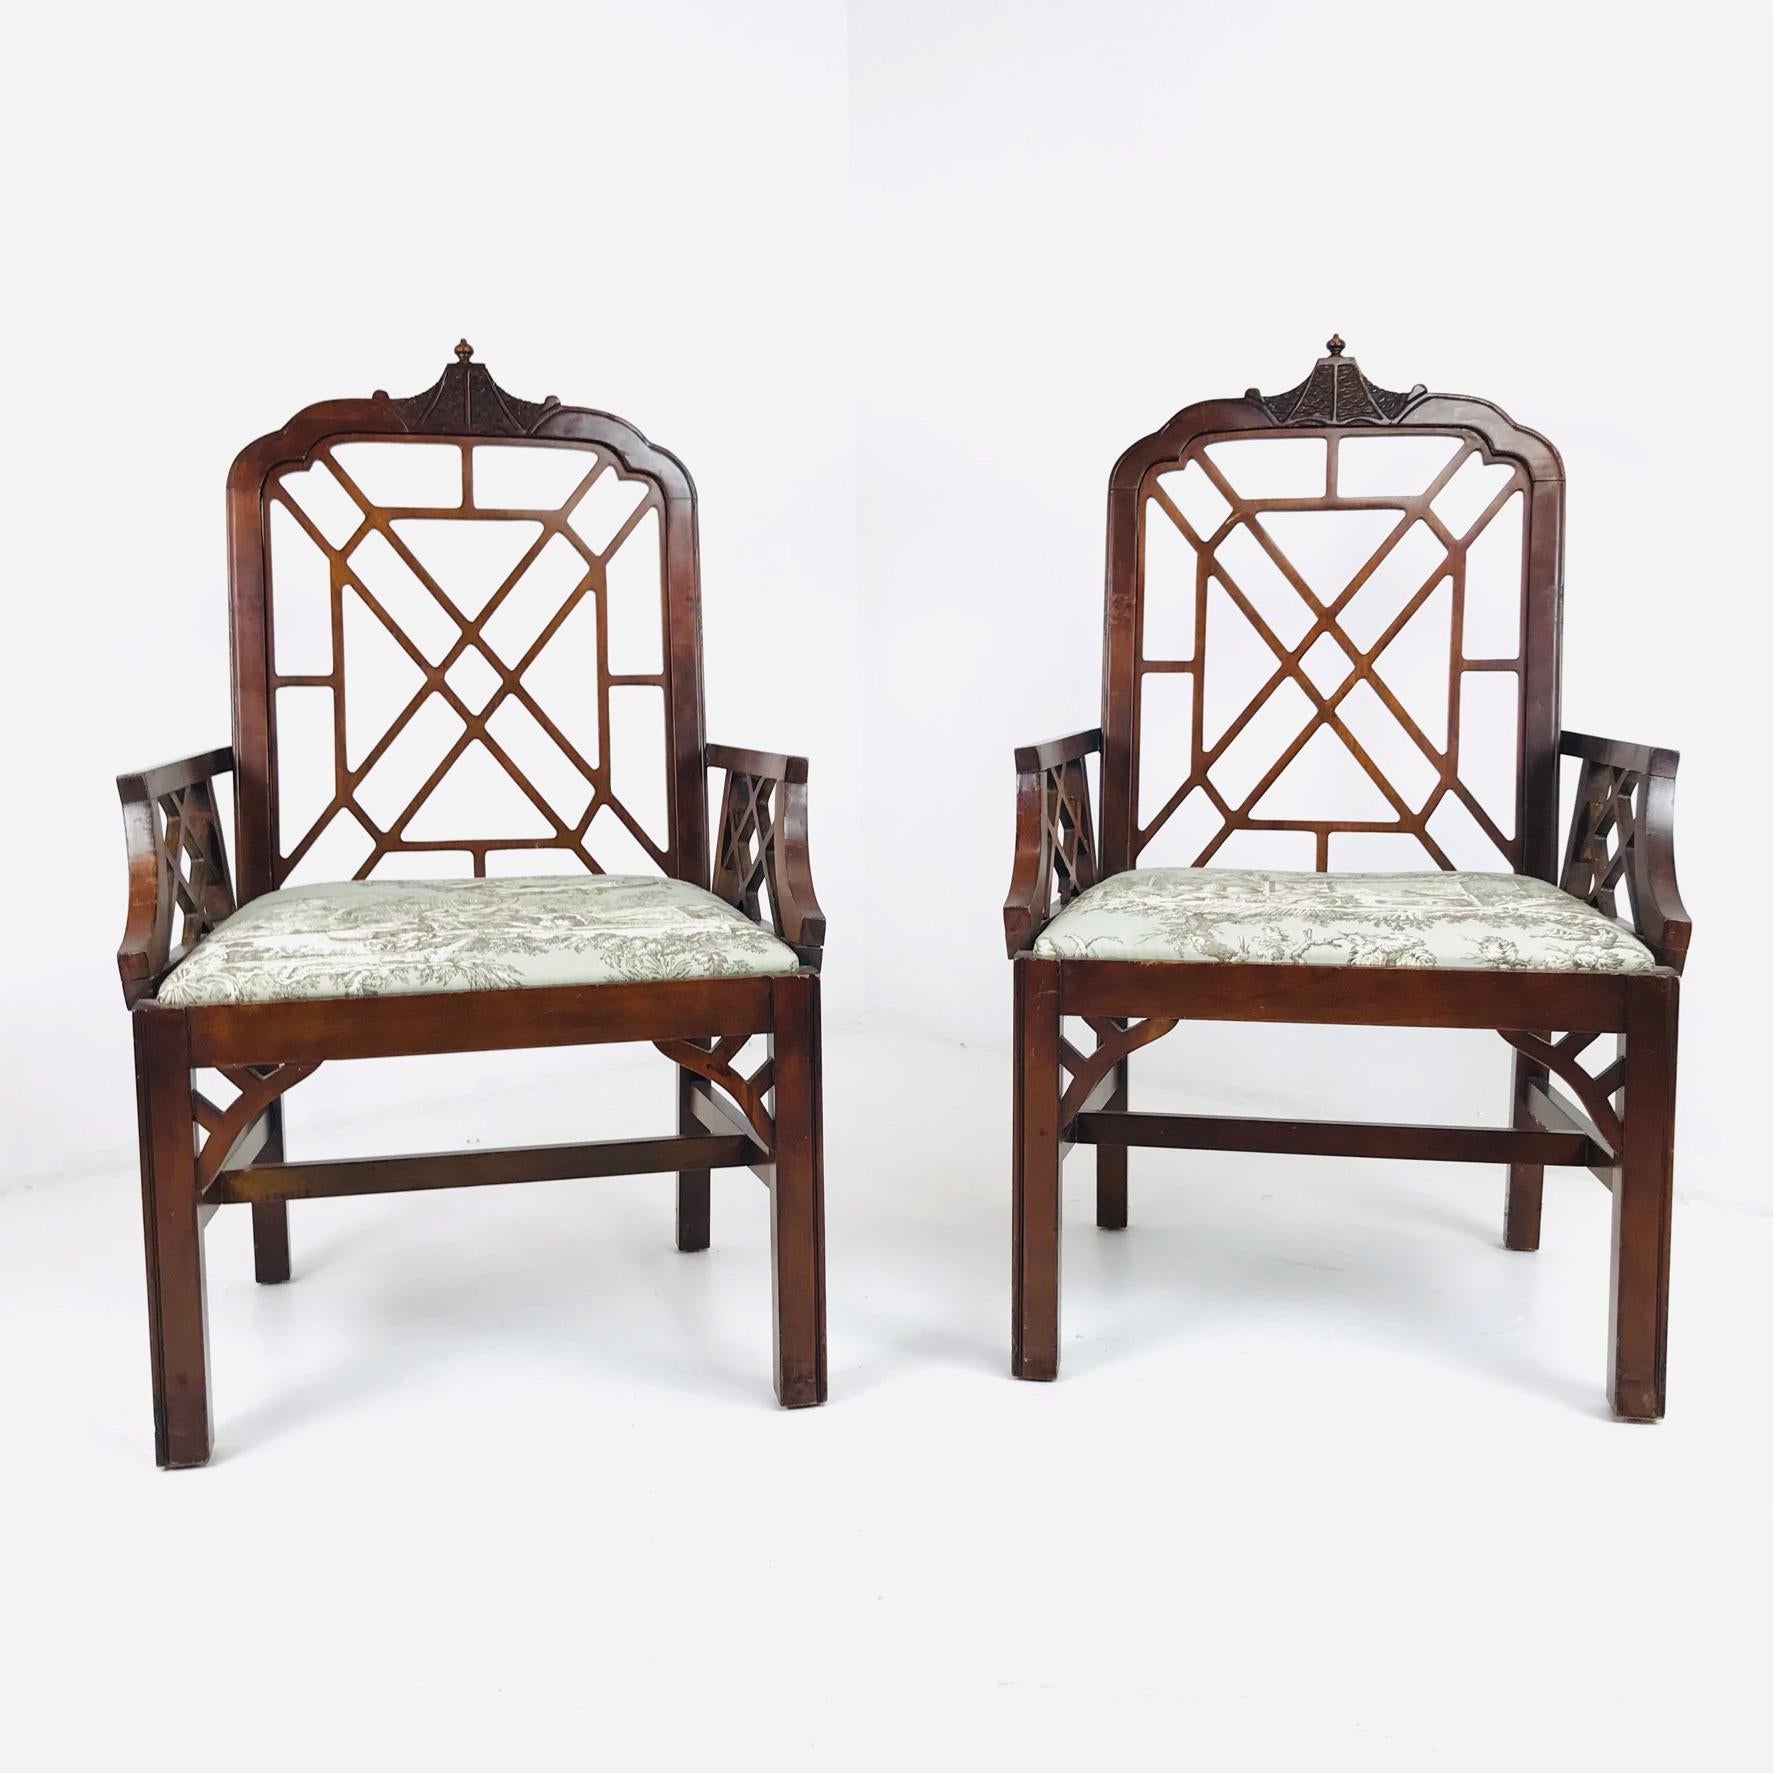 Pair of Chinese Chippendale style mahogany armchairs with upholstered seats. Features striking fretwork details with carved pagoda style back finial and carved brackets at the front and sides.
Chairs measure: 18